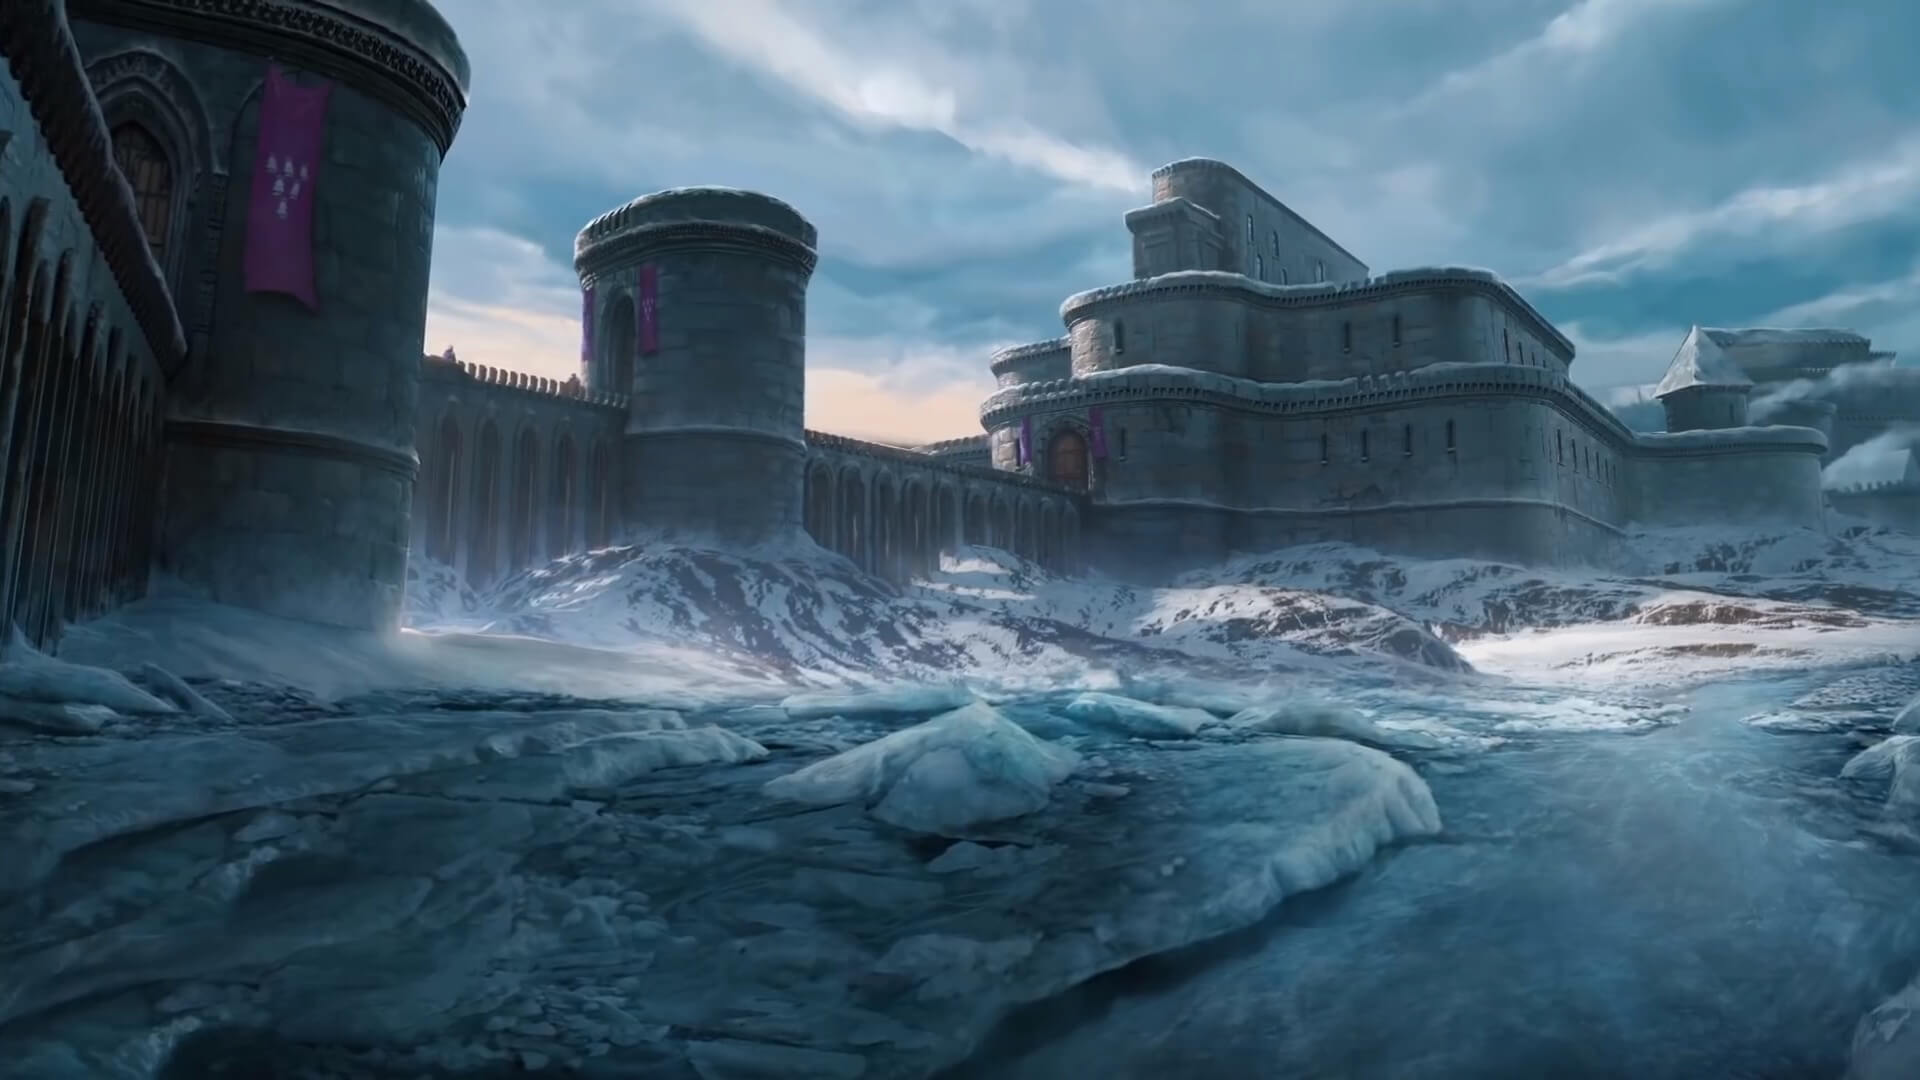 Game of Thrones concept artists work together to create an Unseen